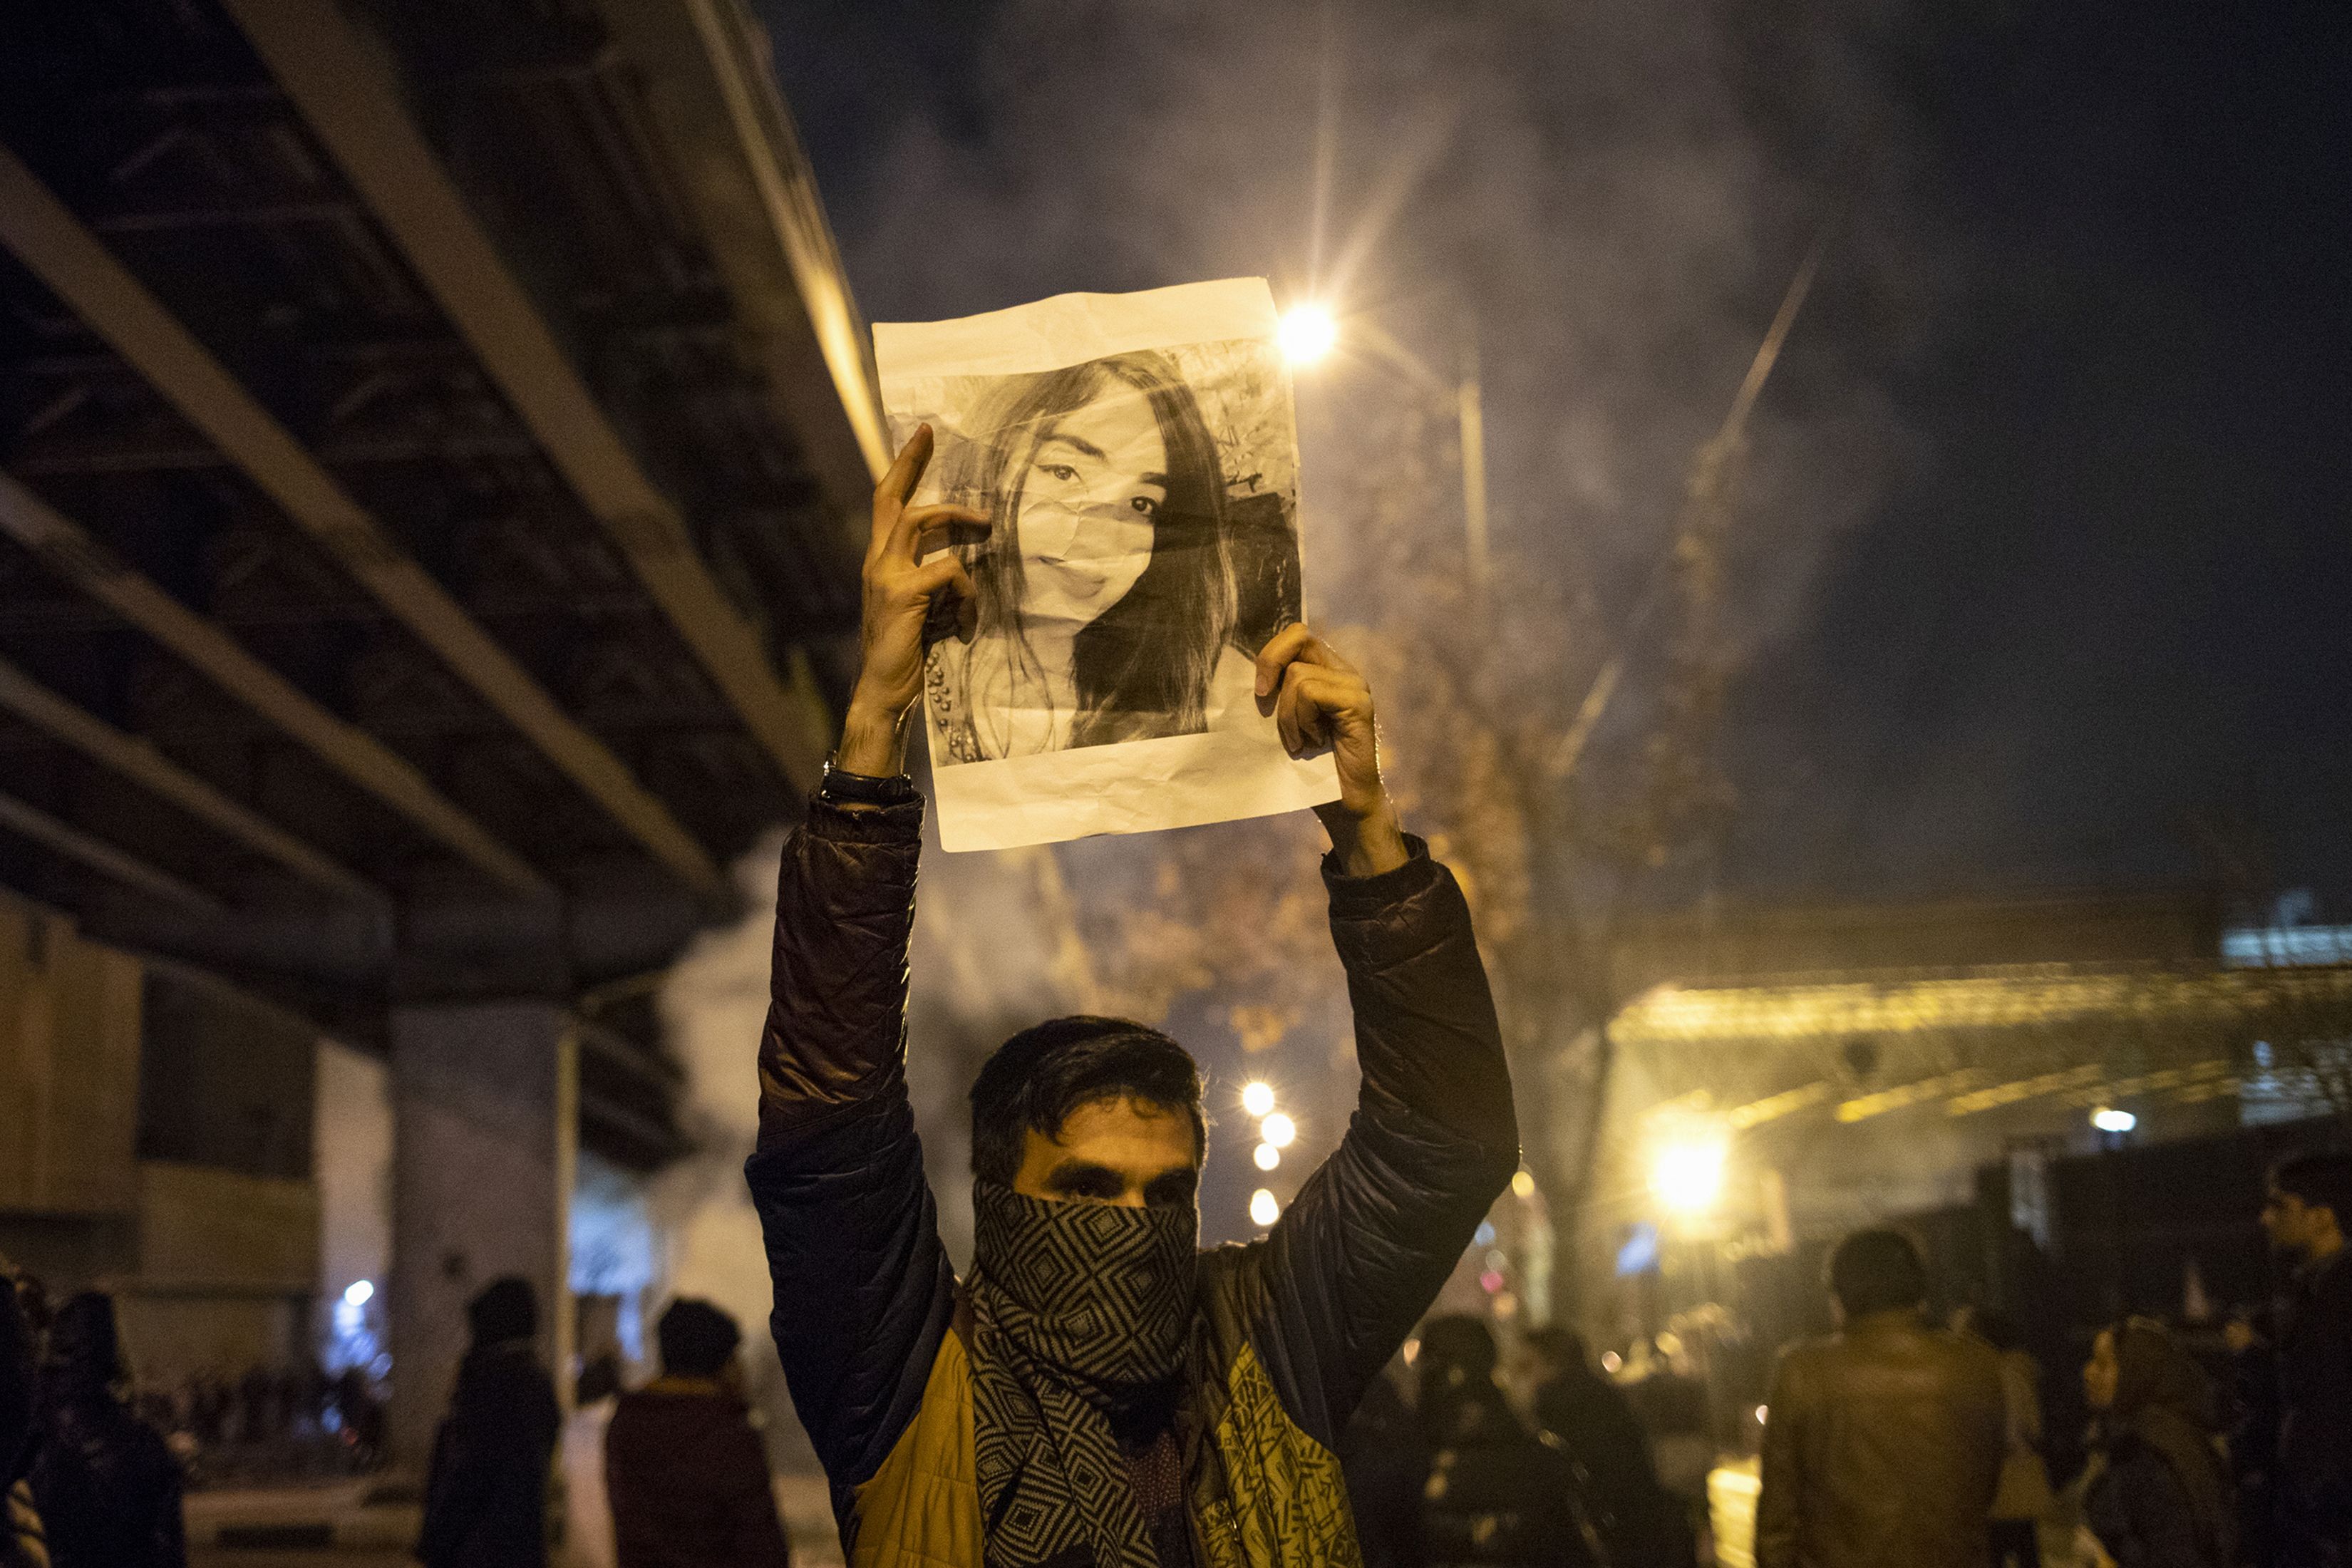  An Iranian man holds a picture of a victim of the Ukrainian Boeing 737-800 plane crash during a demonstration in front of Tehran's Amir Kabir University